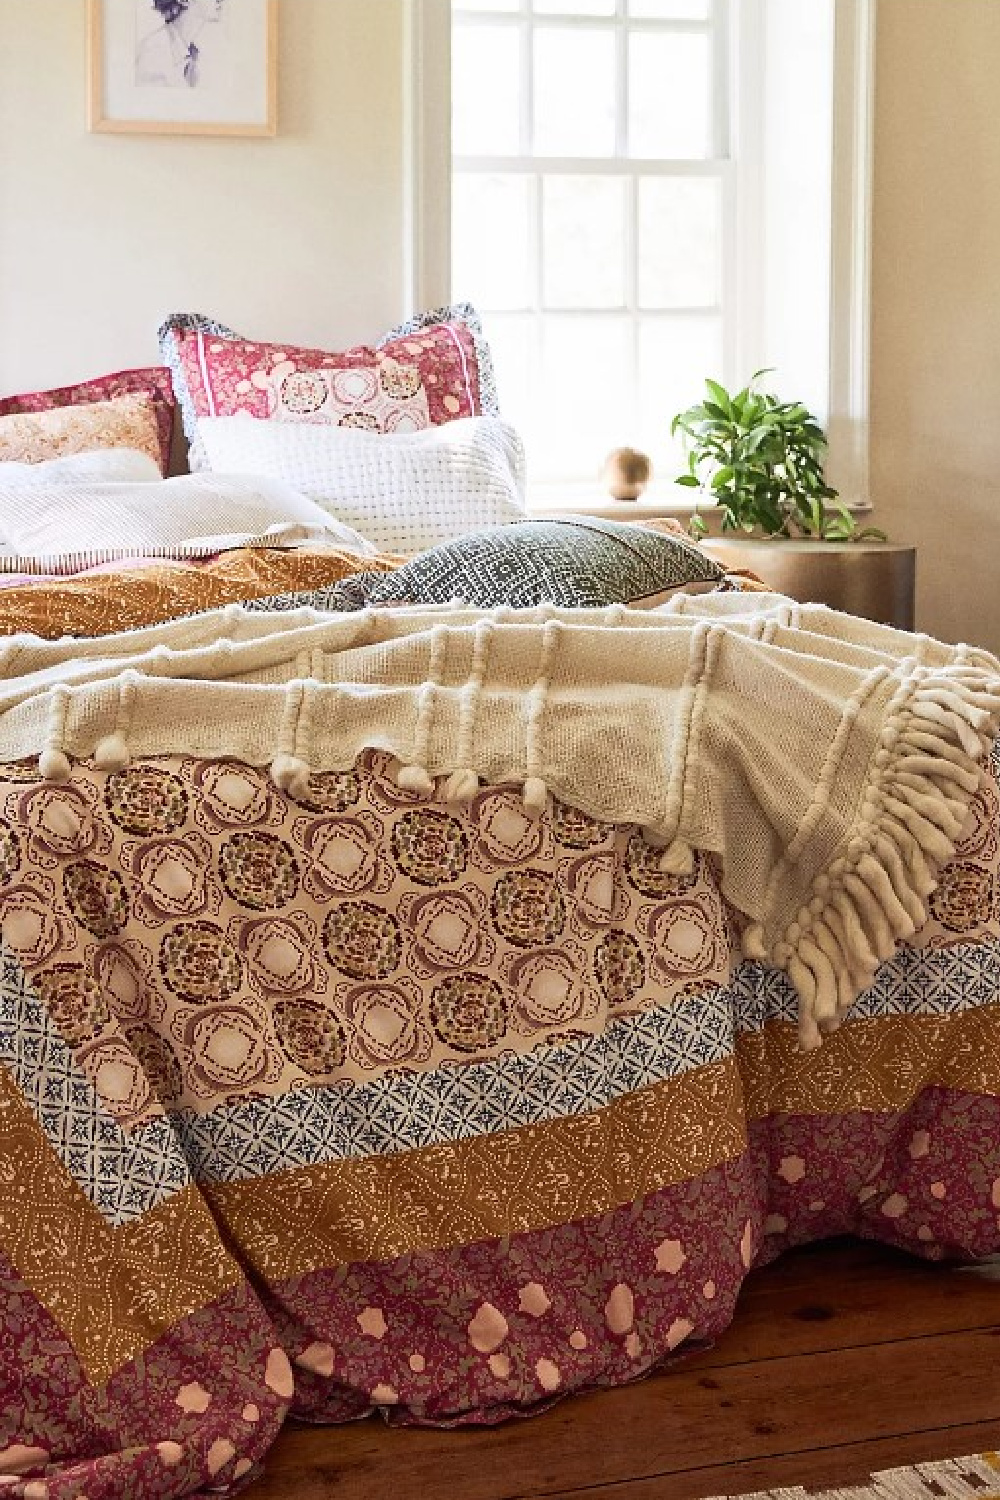 Cabin Throw Blanket designed by Amber Lewis for Anthro. #throws #amberlewis